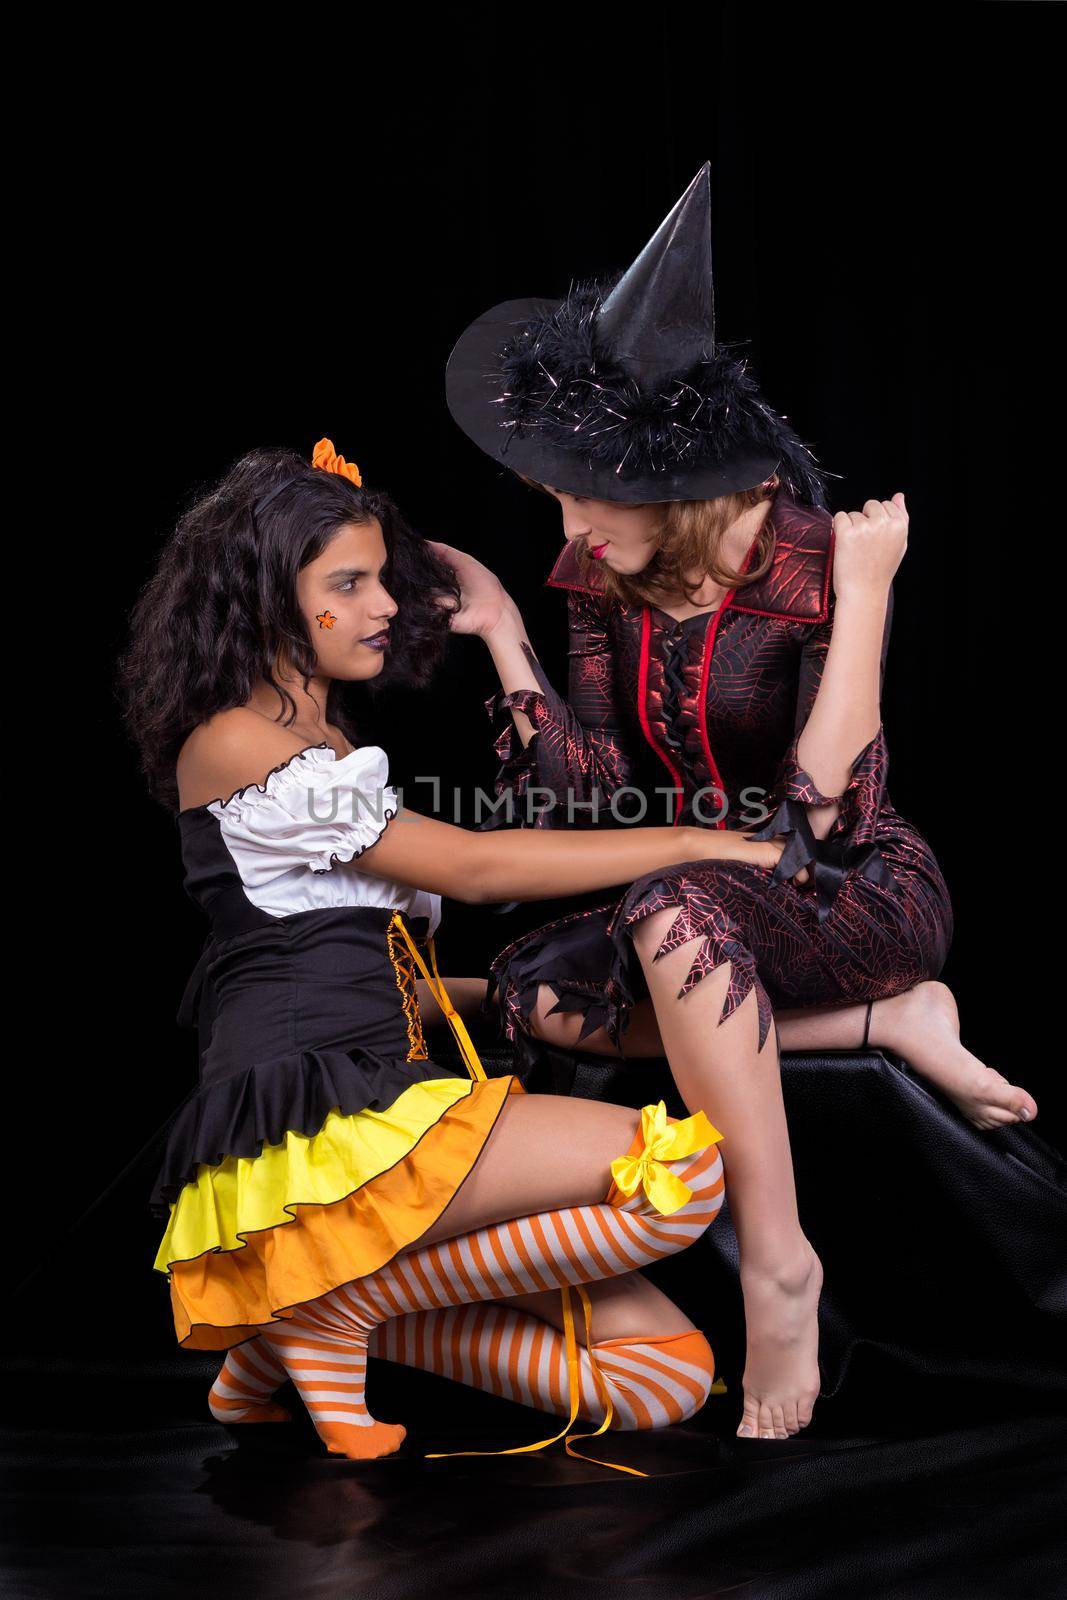 girl dressed as doll and another girl dressed as a witch both portrayed on black background